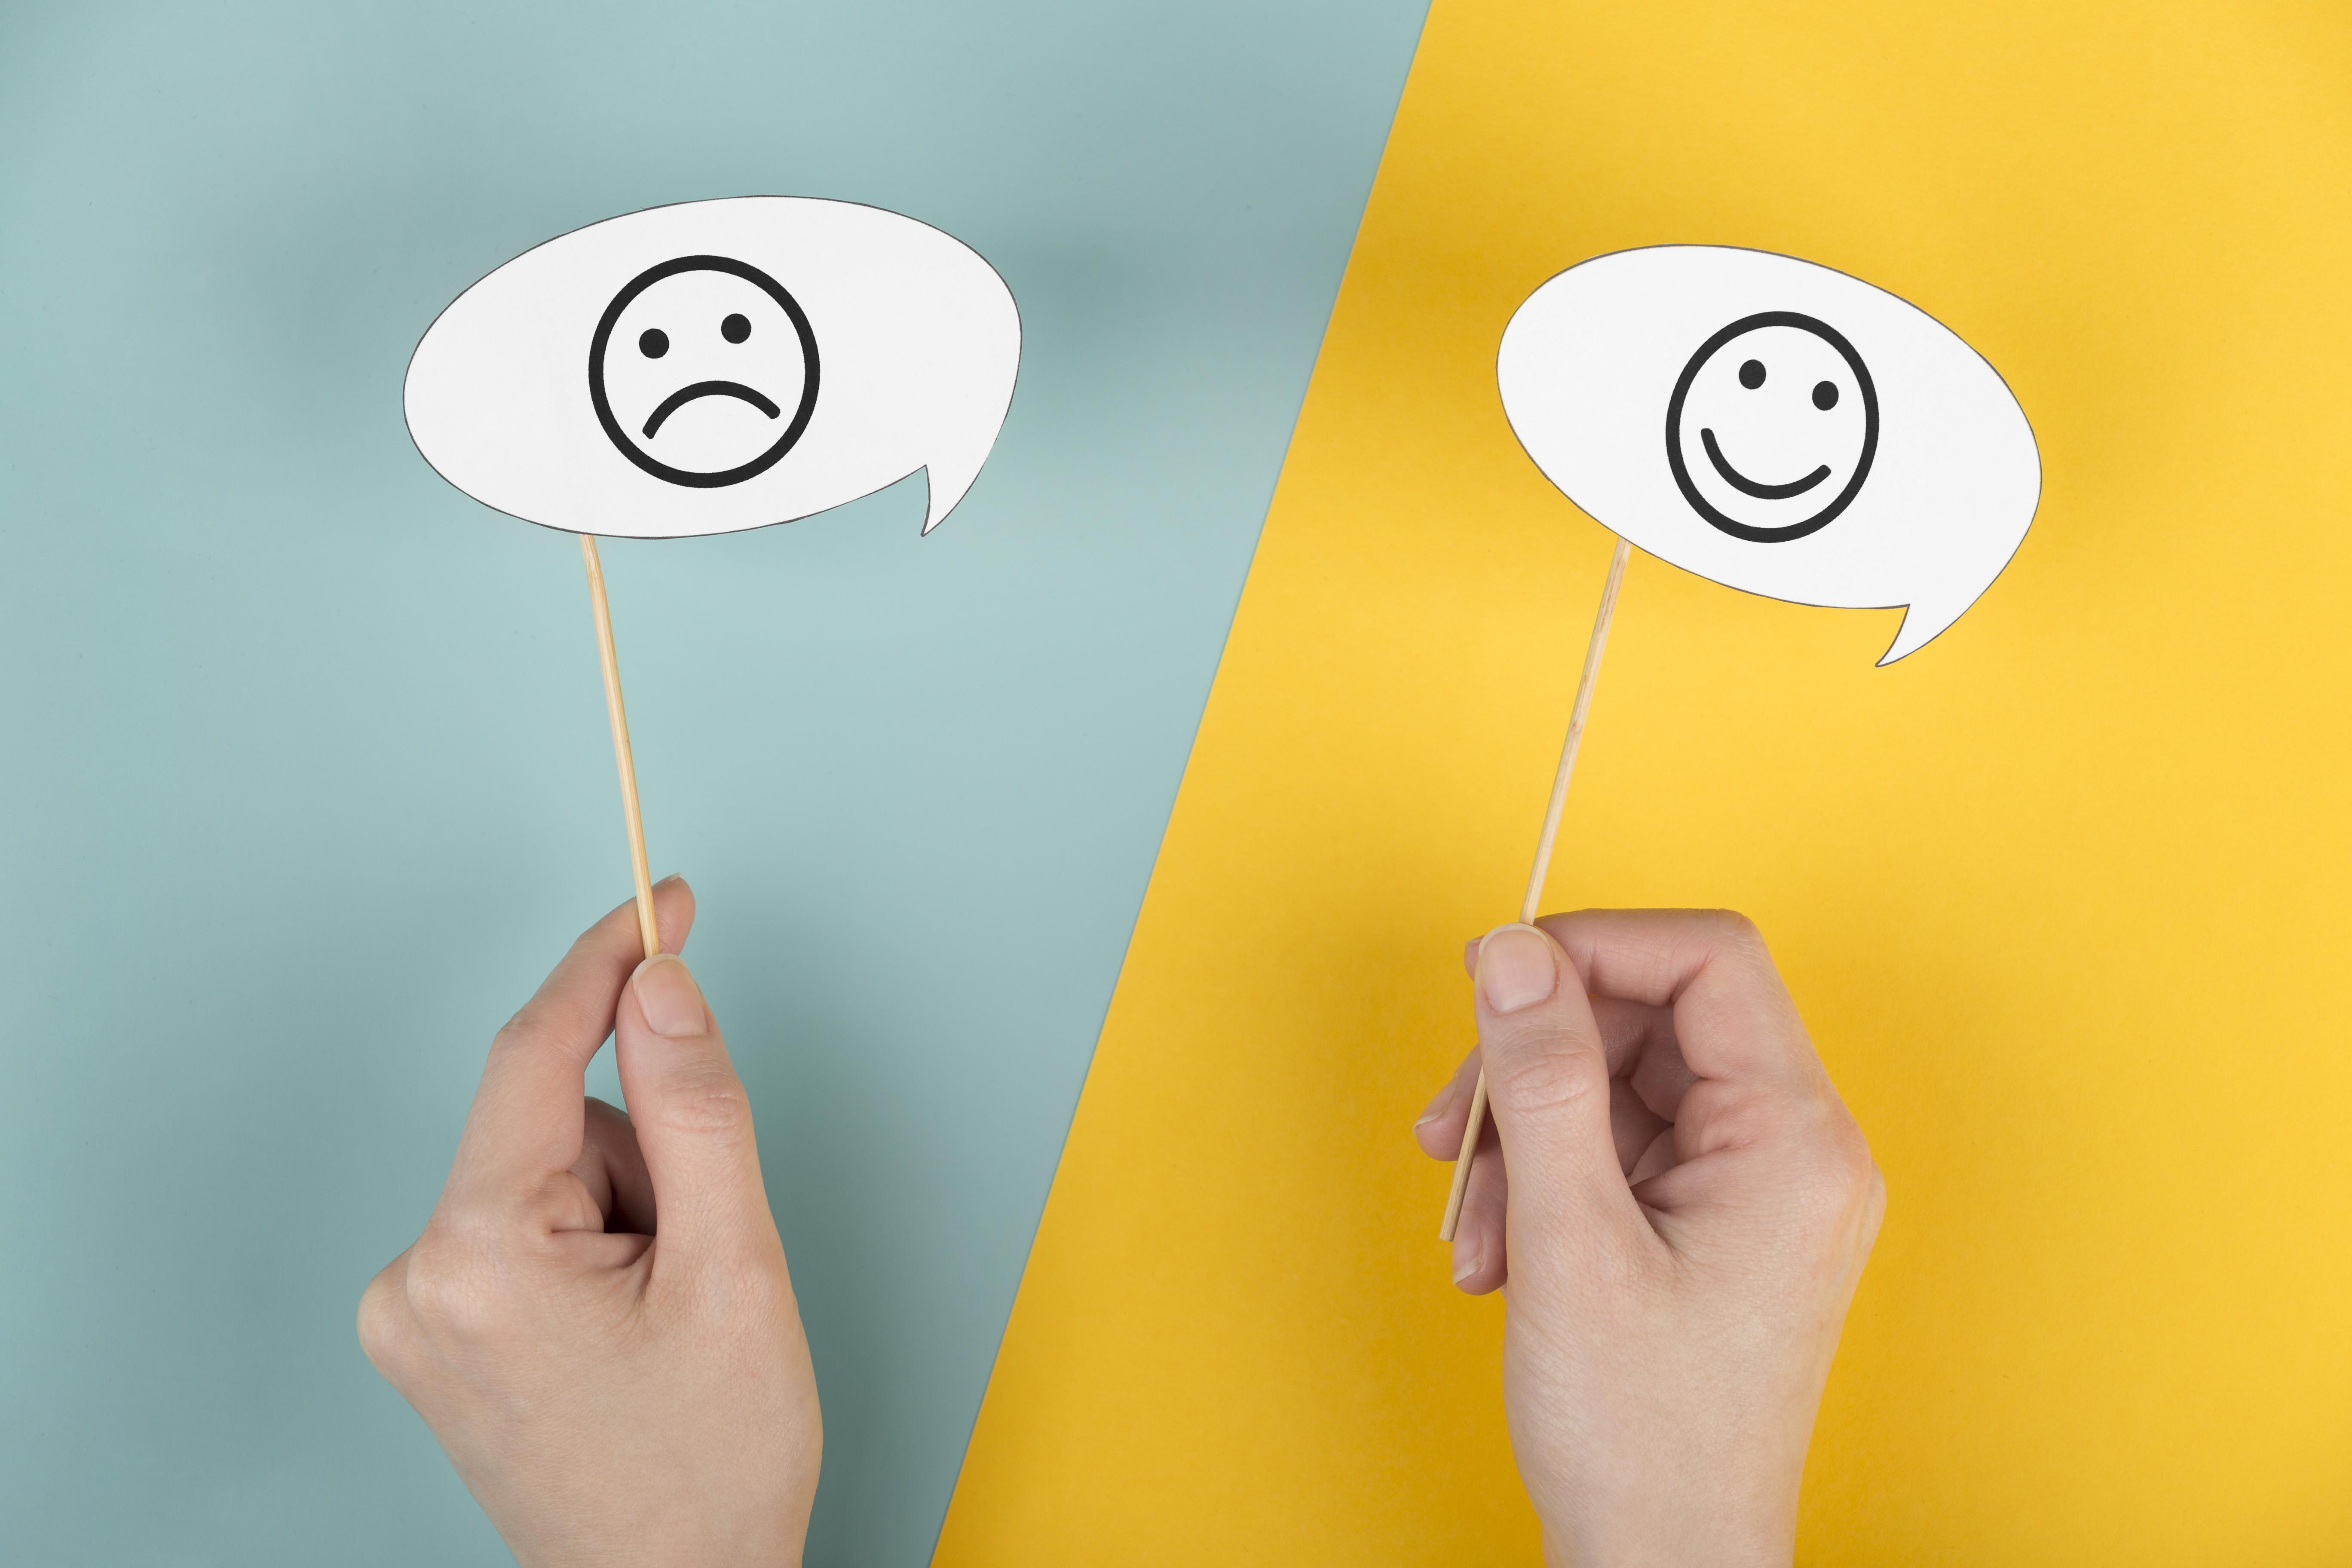 Words Matter: An NLP Approach to Reducing Negativity in Communication